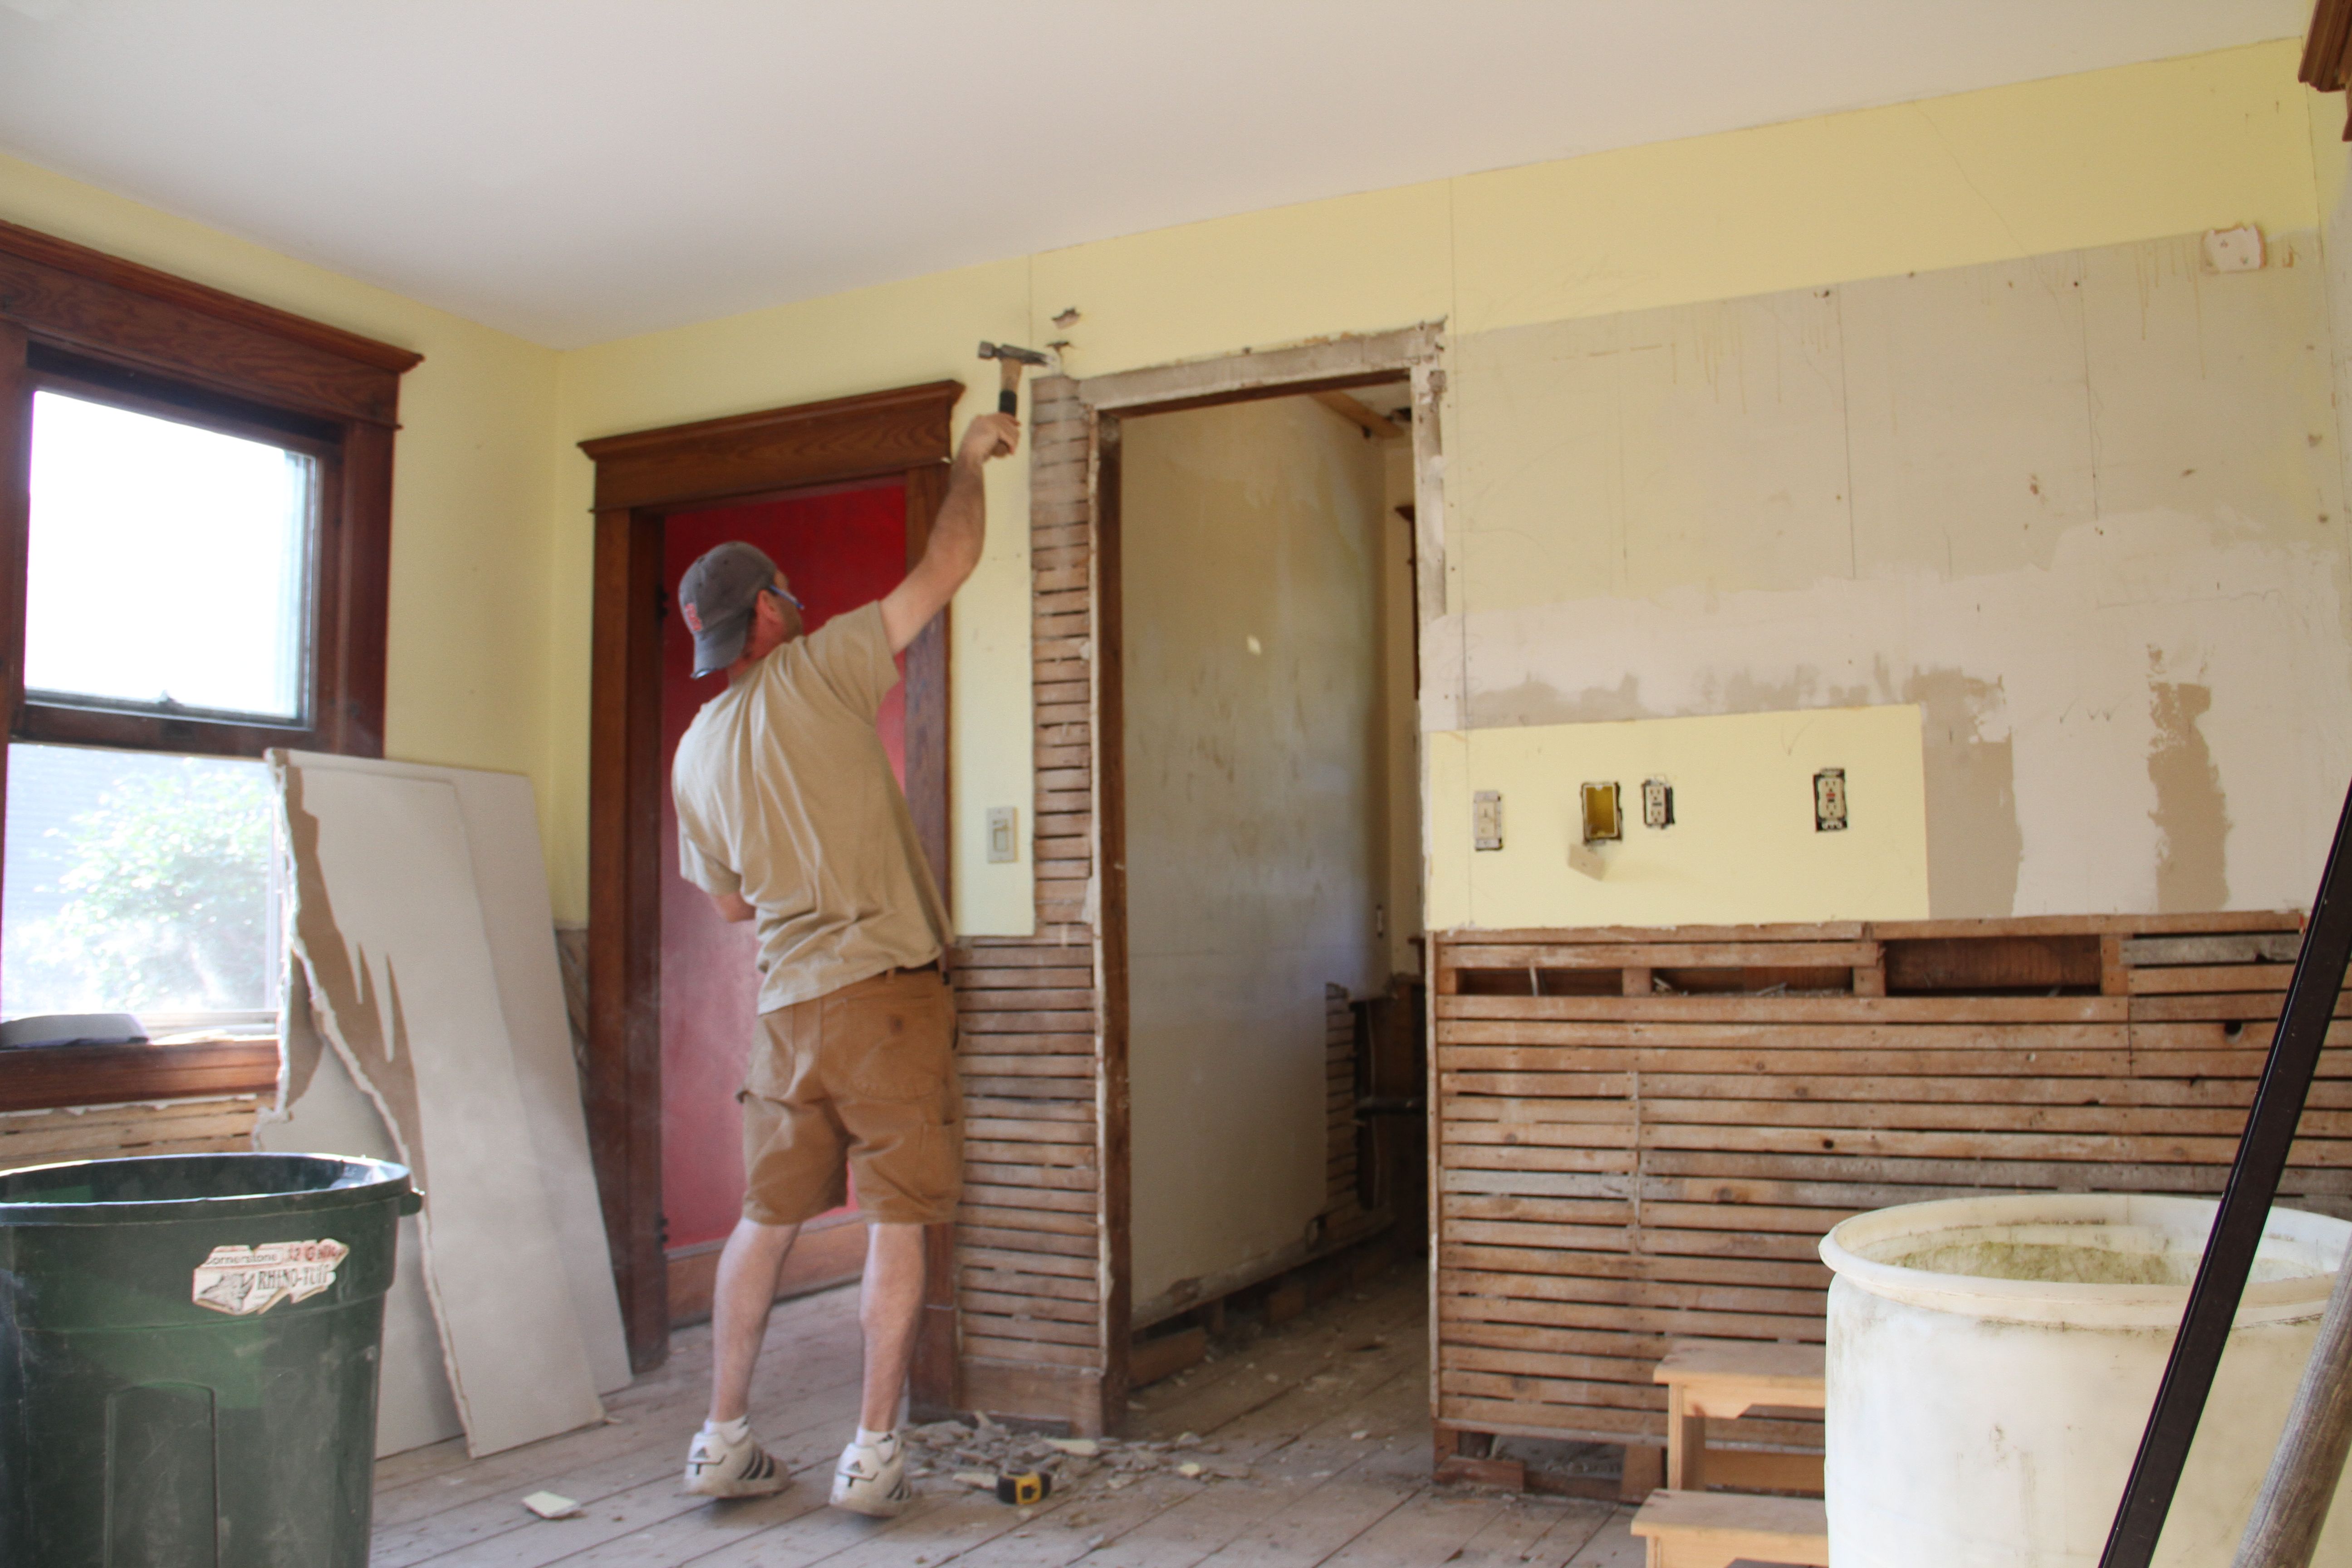 Jonas began the day by continuing with deconstructing the former opening to the powder room.